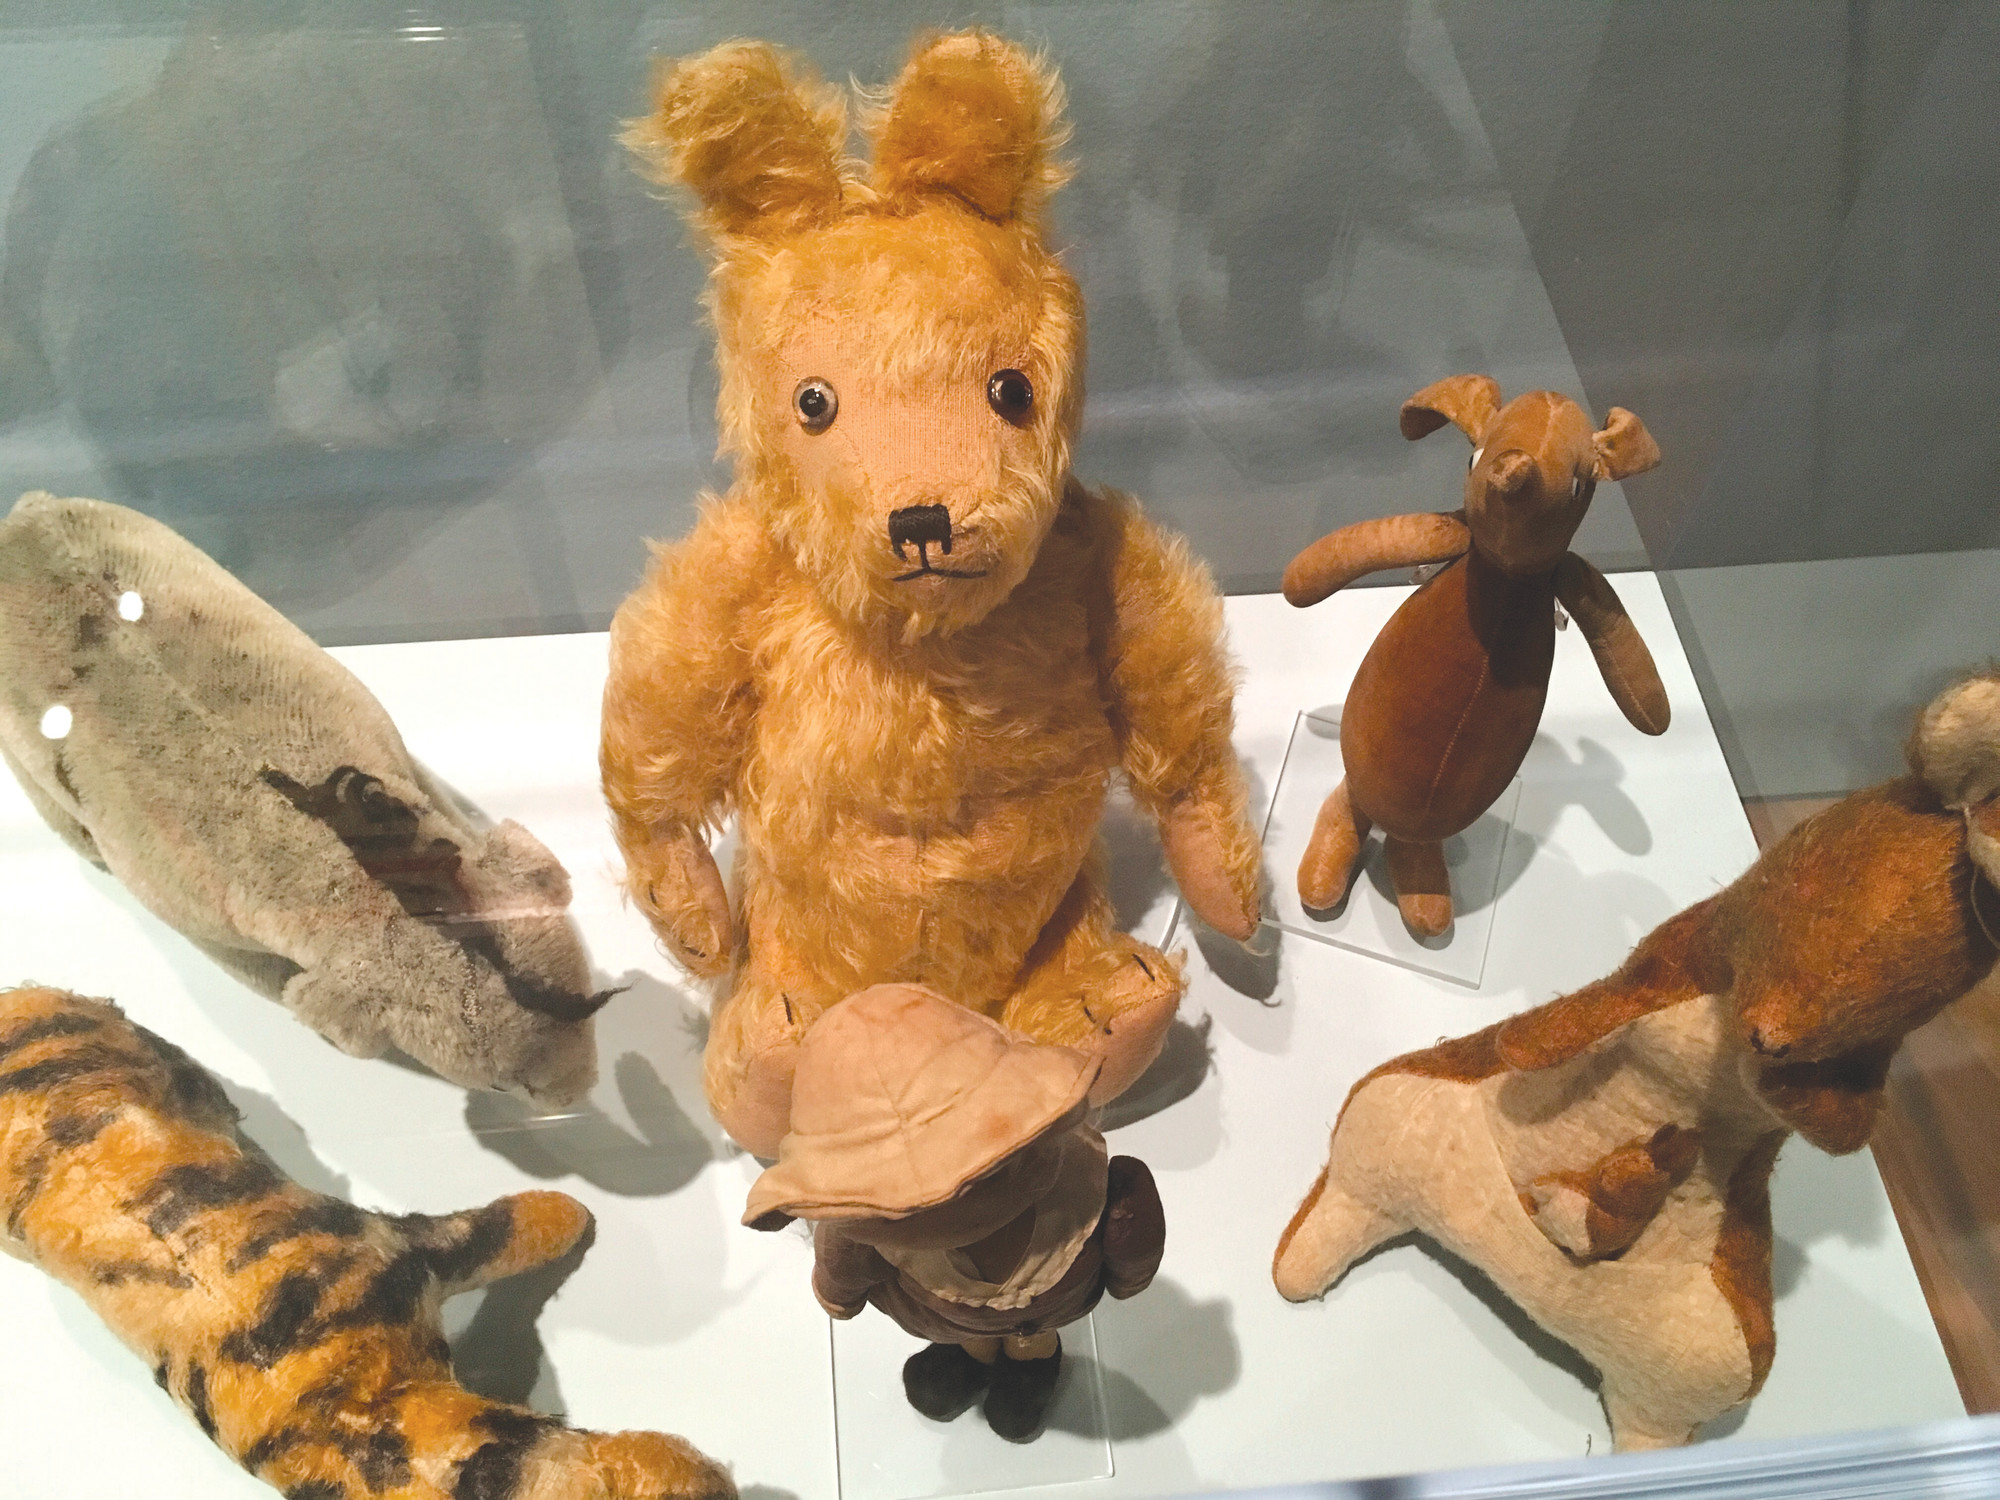 Toys made by the Teddy Toy Company about 1930 are seen May 29 and are early examples of Winnie-the-Pooh merchandise. Atlanta's High Museum of Art is hosting an exhibition called "Winnie-the-Pooh: Exploring a Classic" from June 3 to Sept. 2.